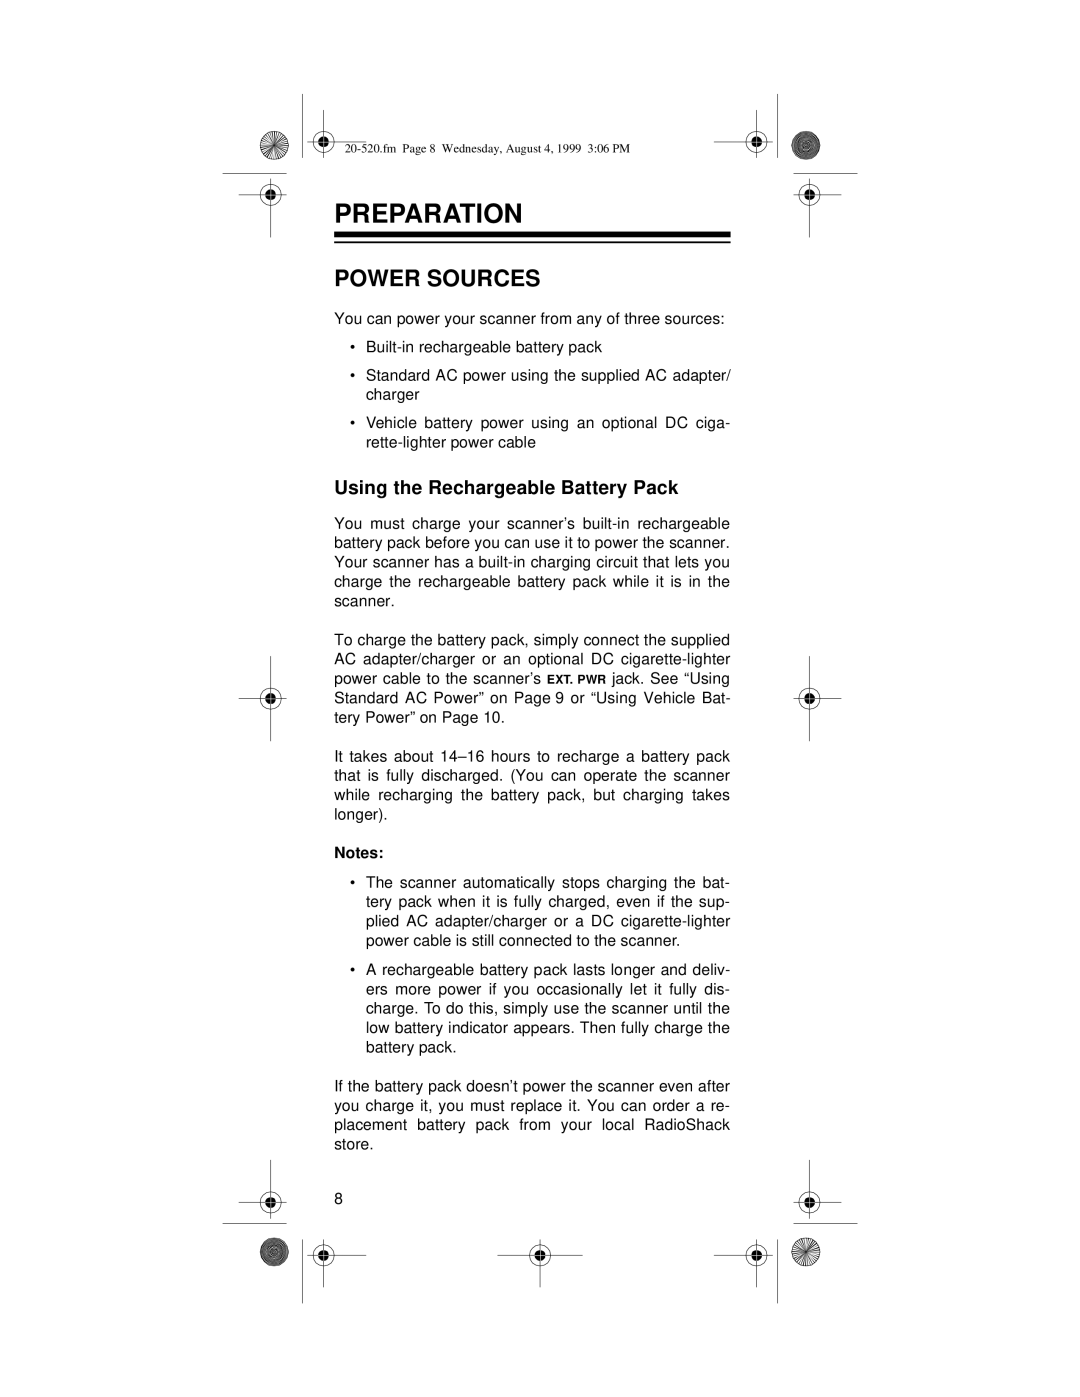 Radio Shack PRO-90 owner manual Preparation, Power Sources, Using the Rechargeable Battery Pack 